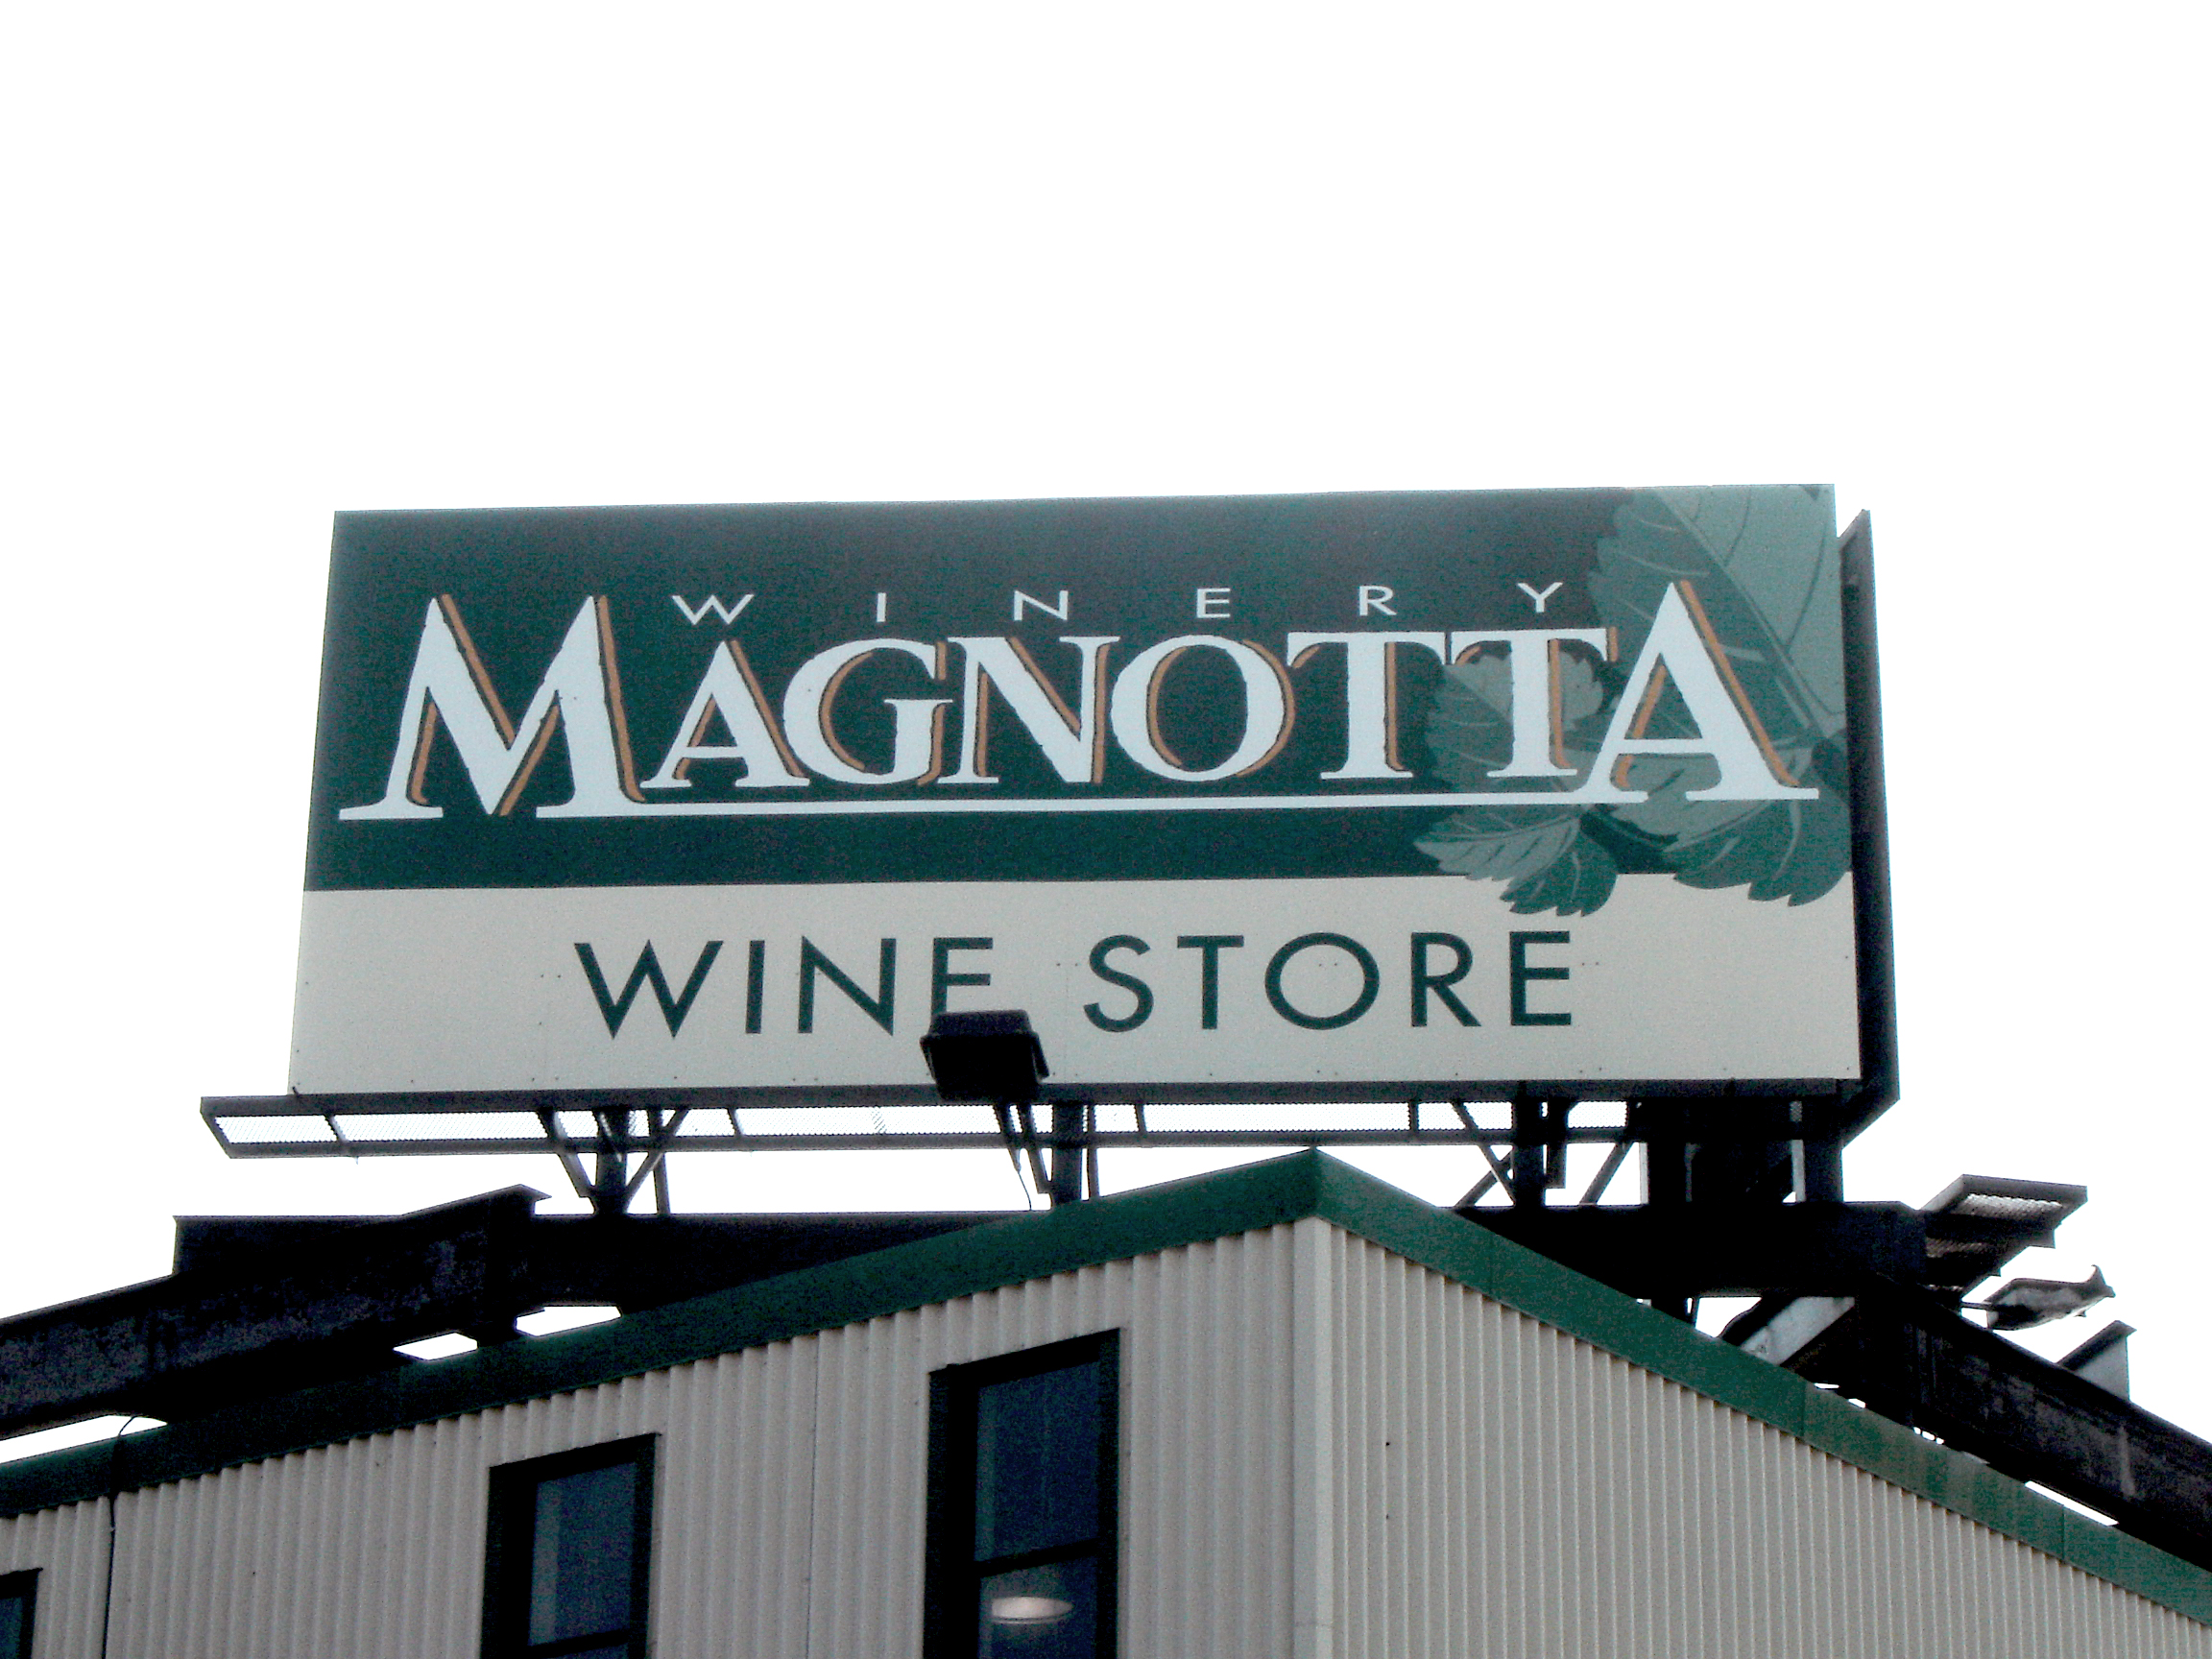 Billboard sign for Magnotta Winery.